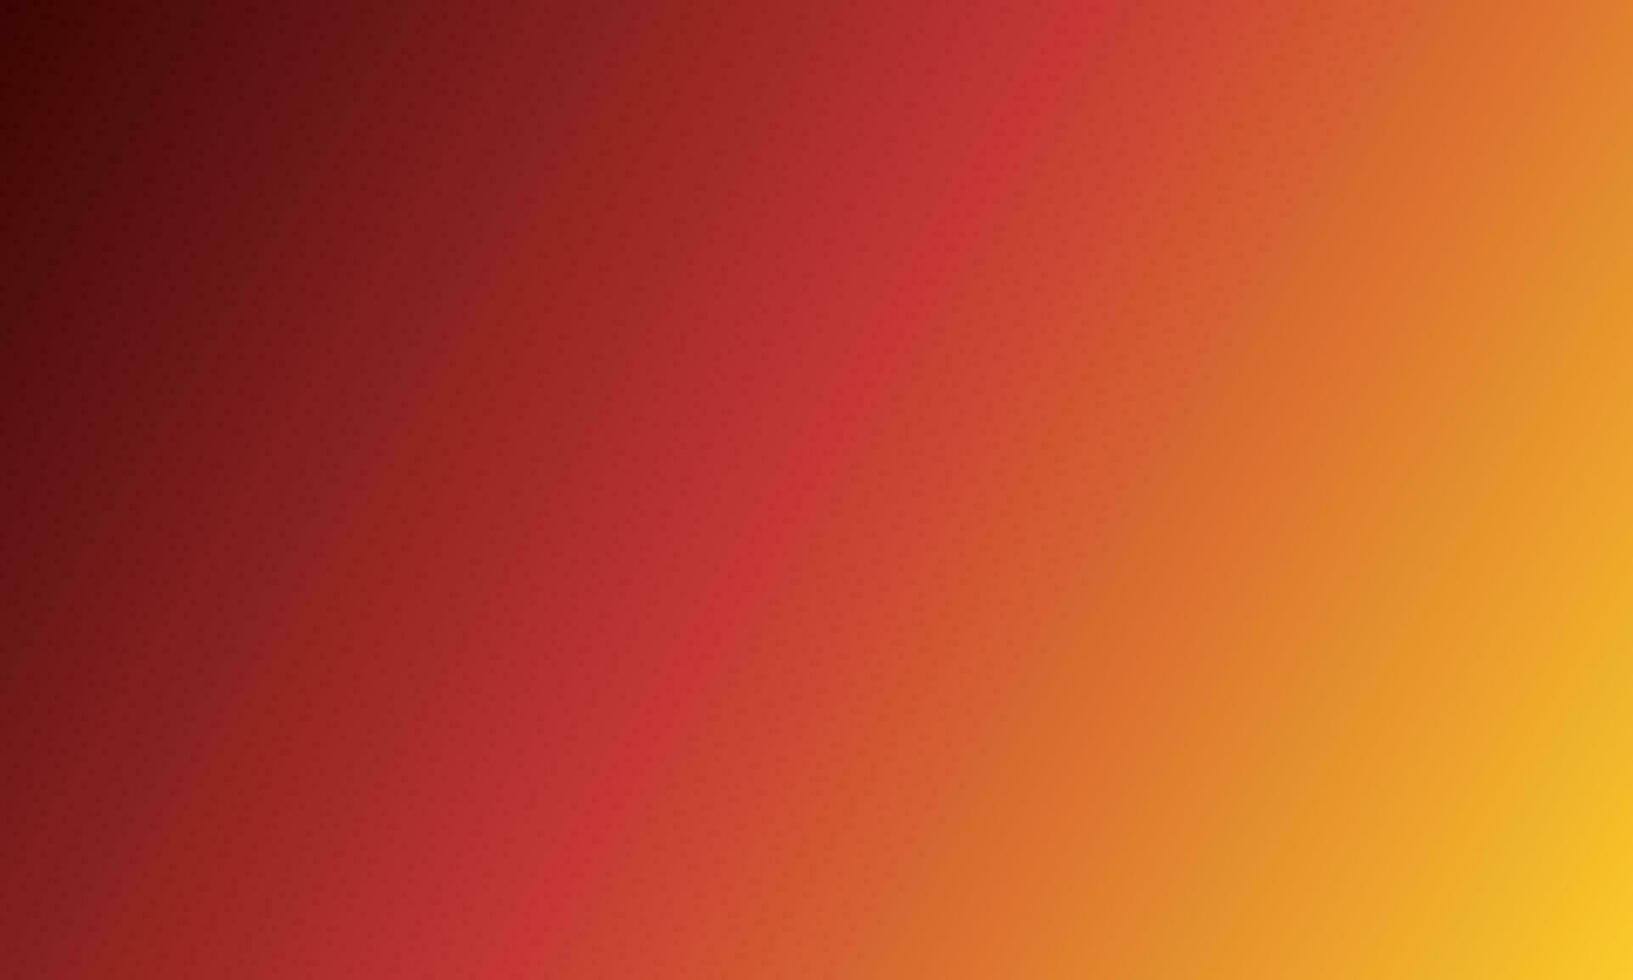 seamless gradient blurred on dark red, yellow colors. abstract design background texture. Vector illustration graphic template for banner, presentation, wallpaper, backdrop, digital